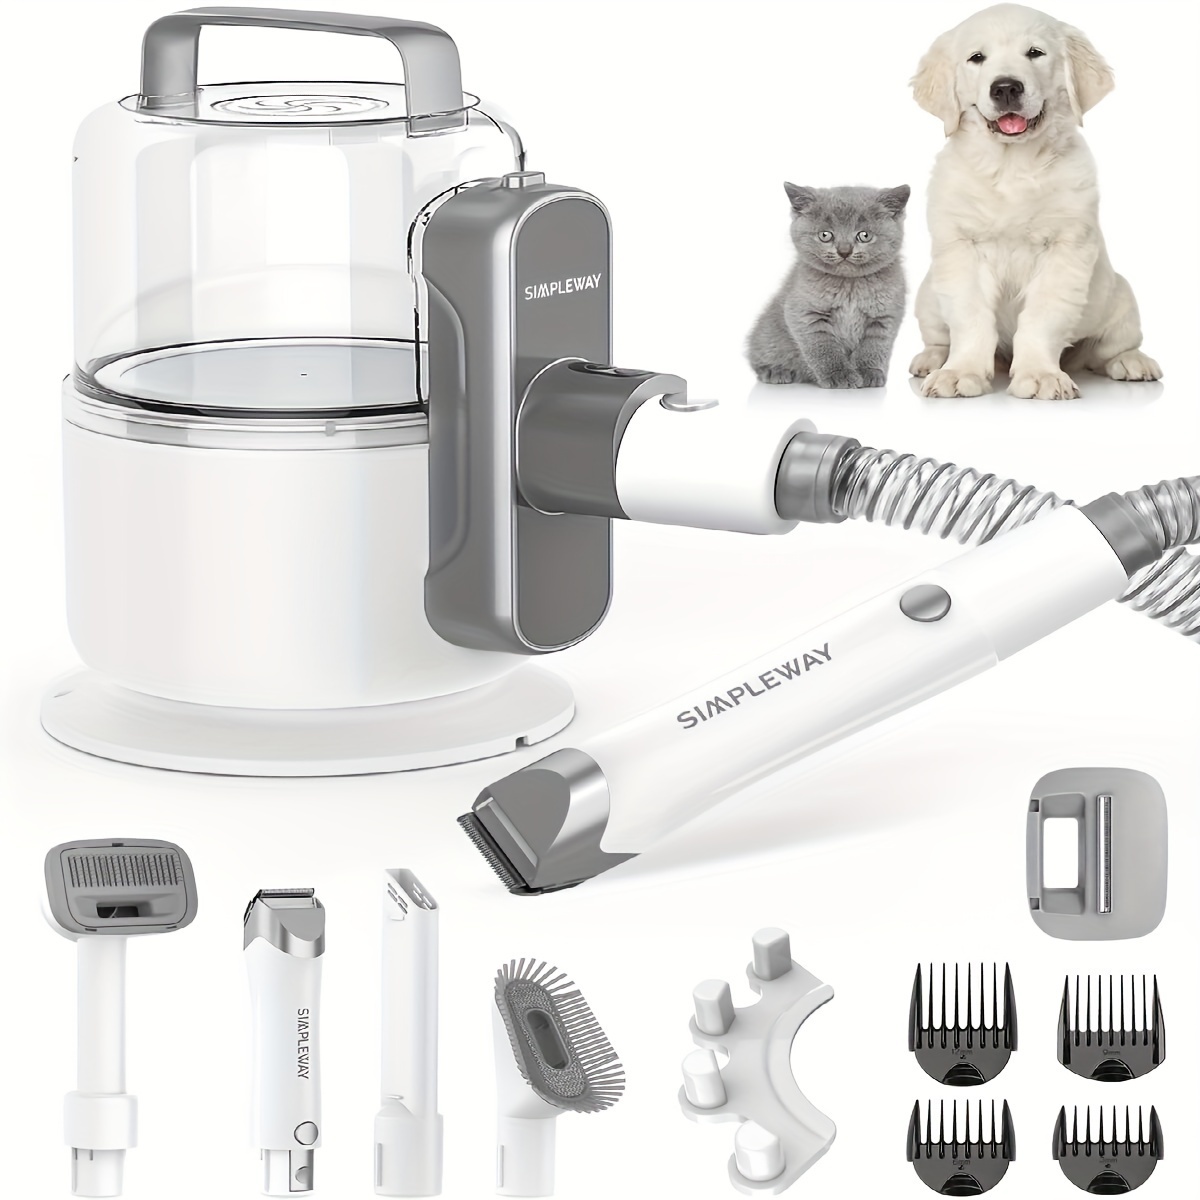 

Pet Grooming Vacuum, Dog Vacuum For Shedding Grooming And Pet Vacuum For Dog Hair At Home, 6 In 1 Dog Grooming Kit With 3 Suction Mode And Large Capacity Dust Cup